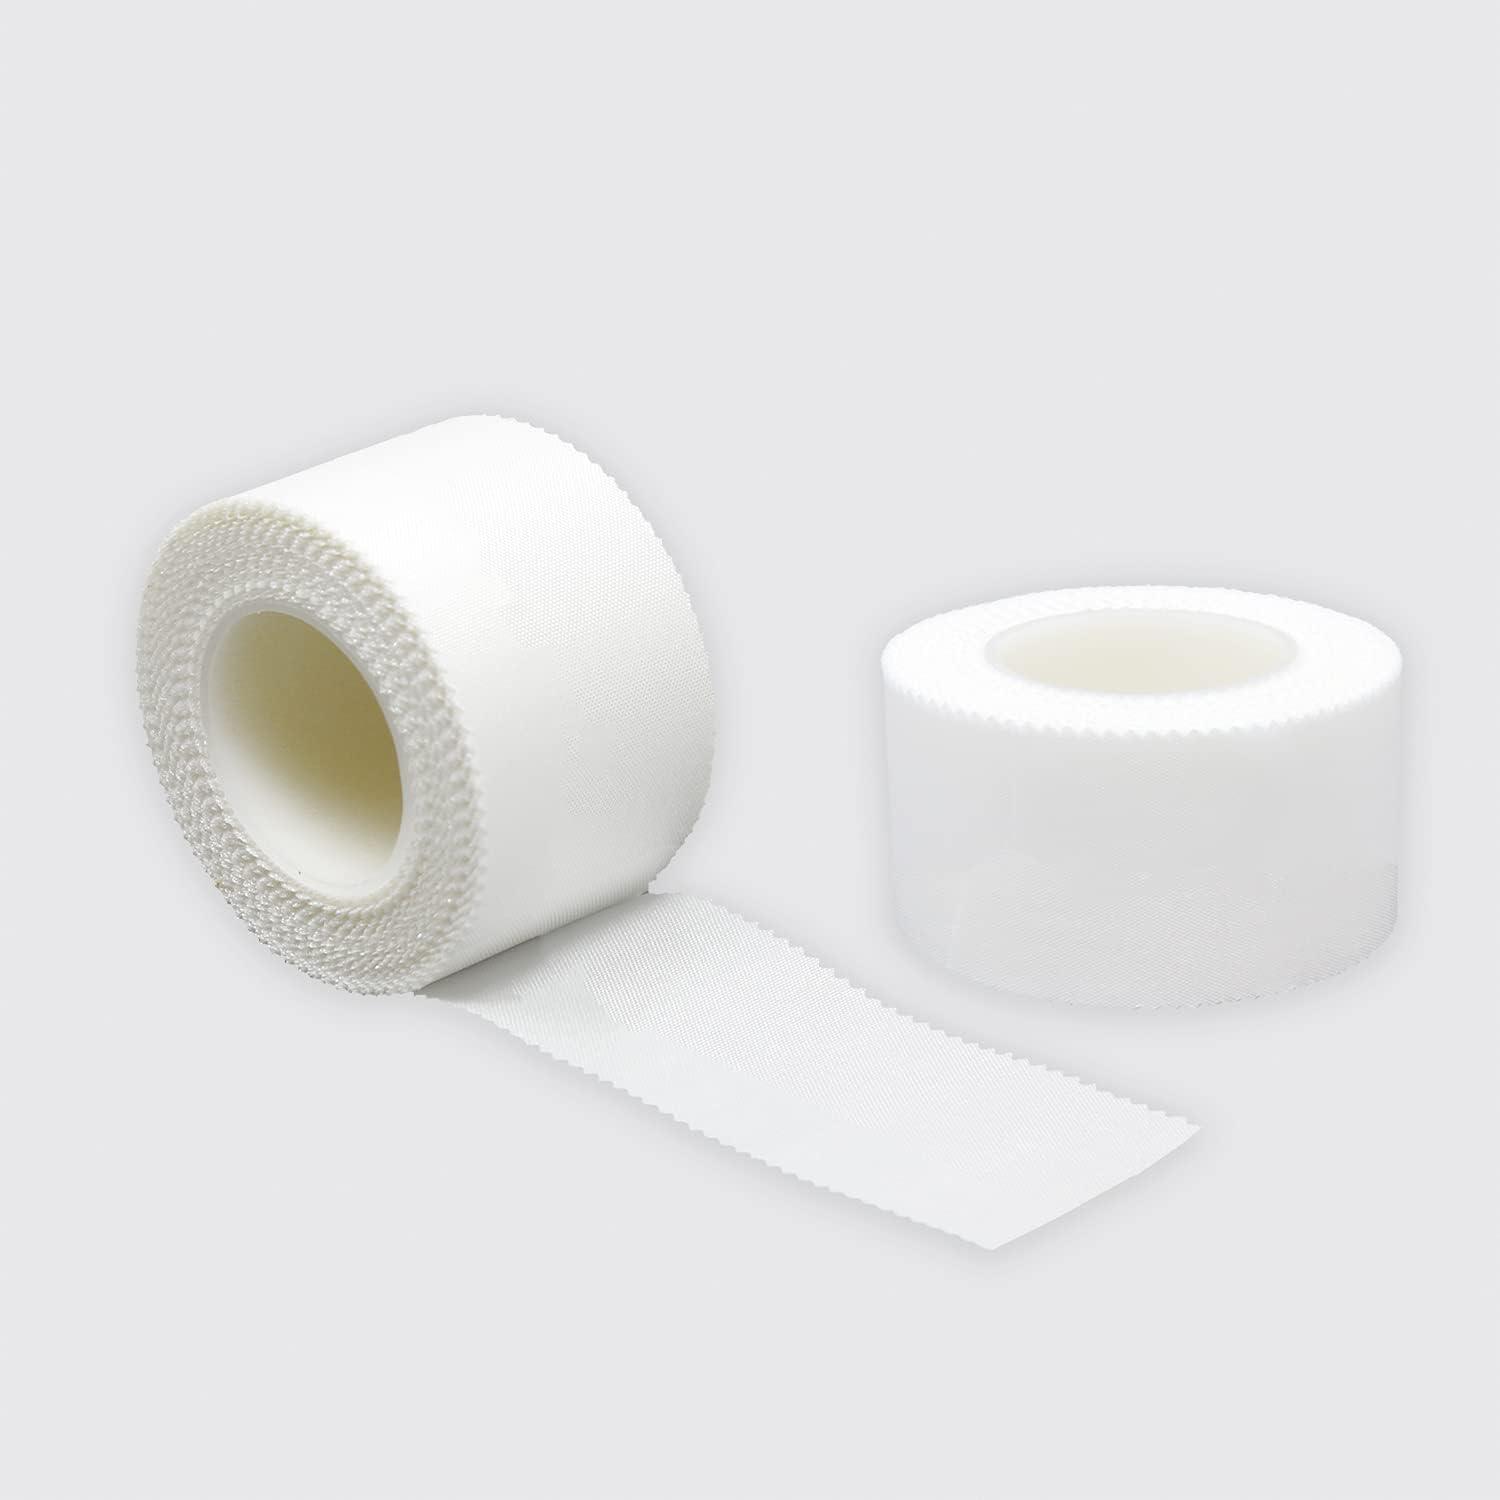 M00004 MOREZMORE White Floral Tape 1 Roll Adhesive Stretch Doll